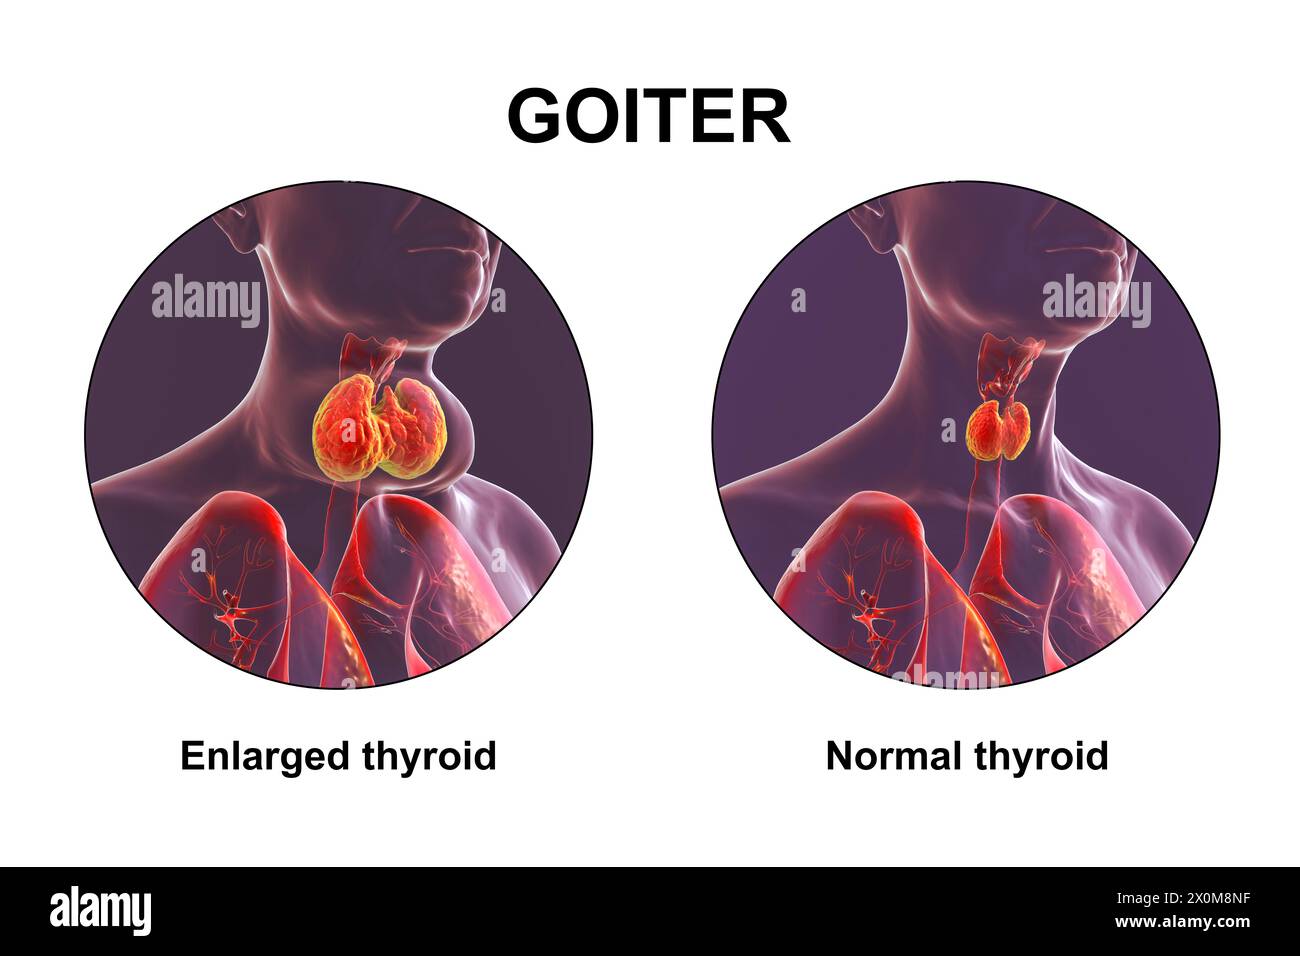 3D illustration of a person with an enlarged thyroid gland (base of neck), known as a goiter, and the same person with a healthy thyroid (right) for comparison. Stock Photo